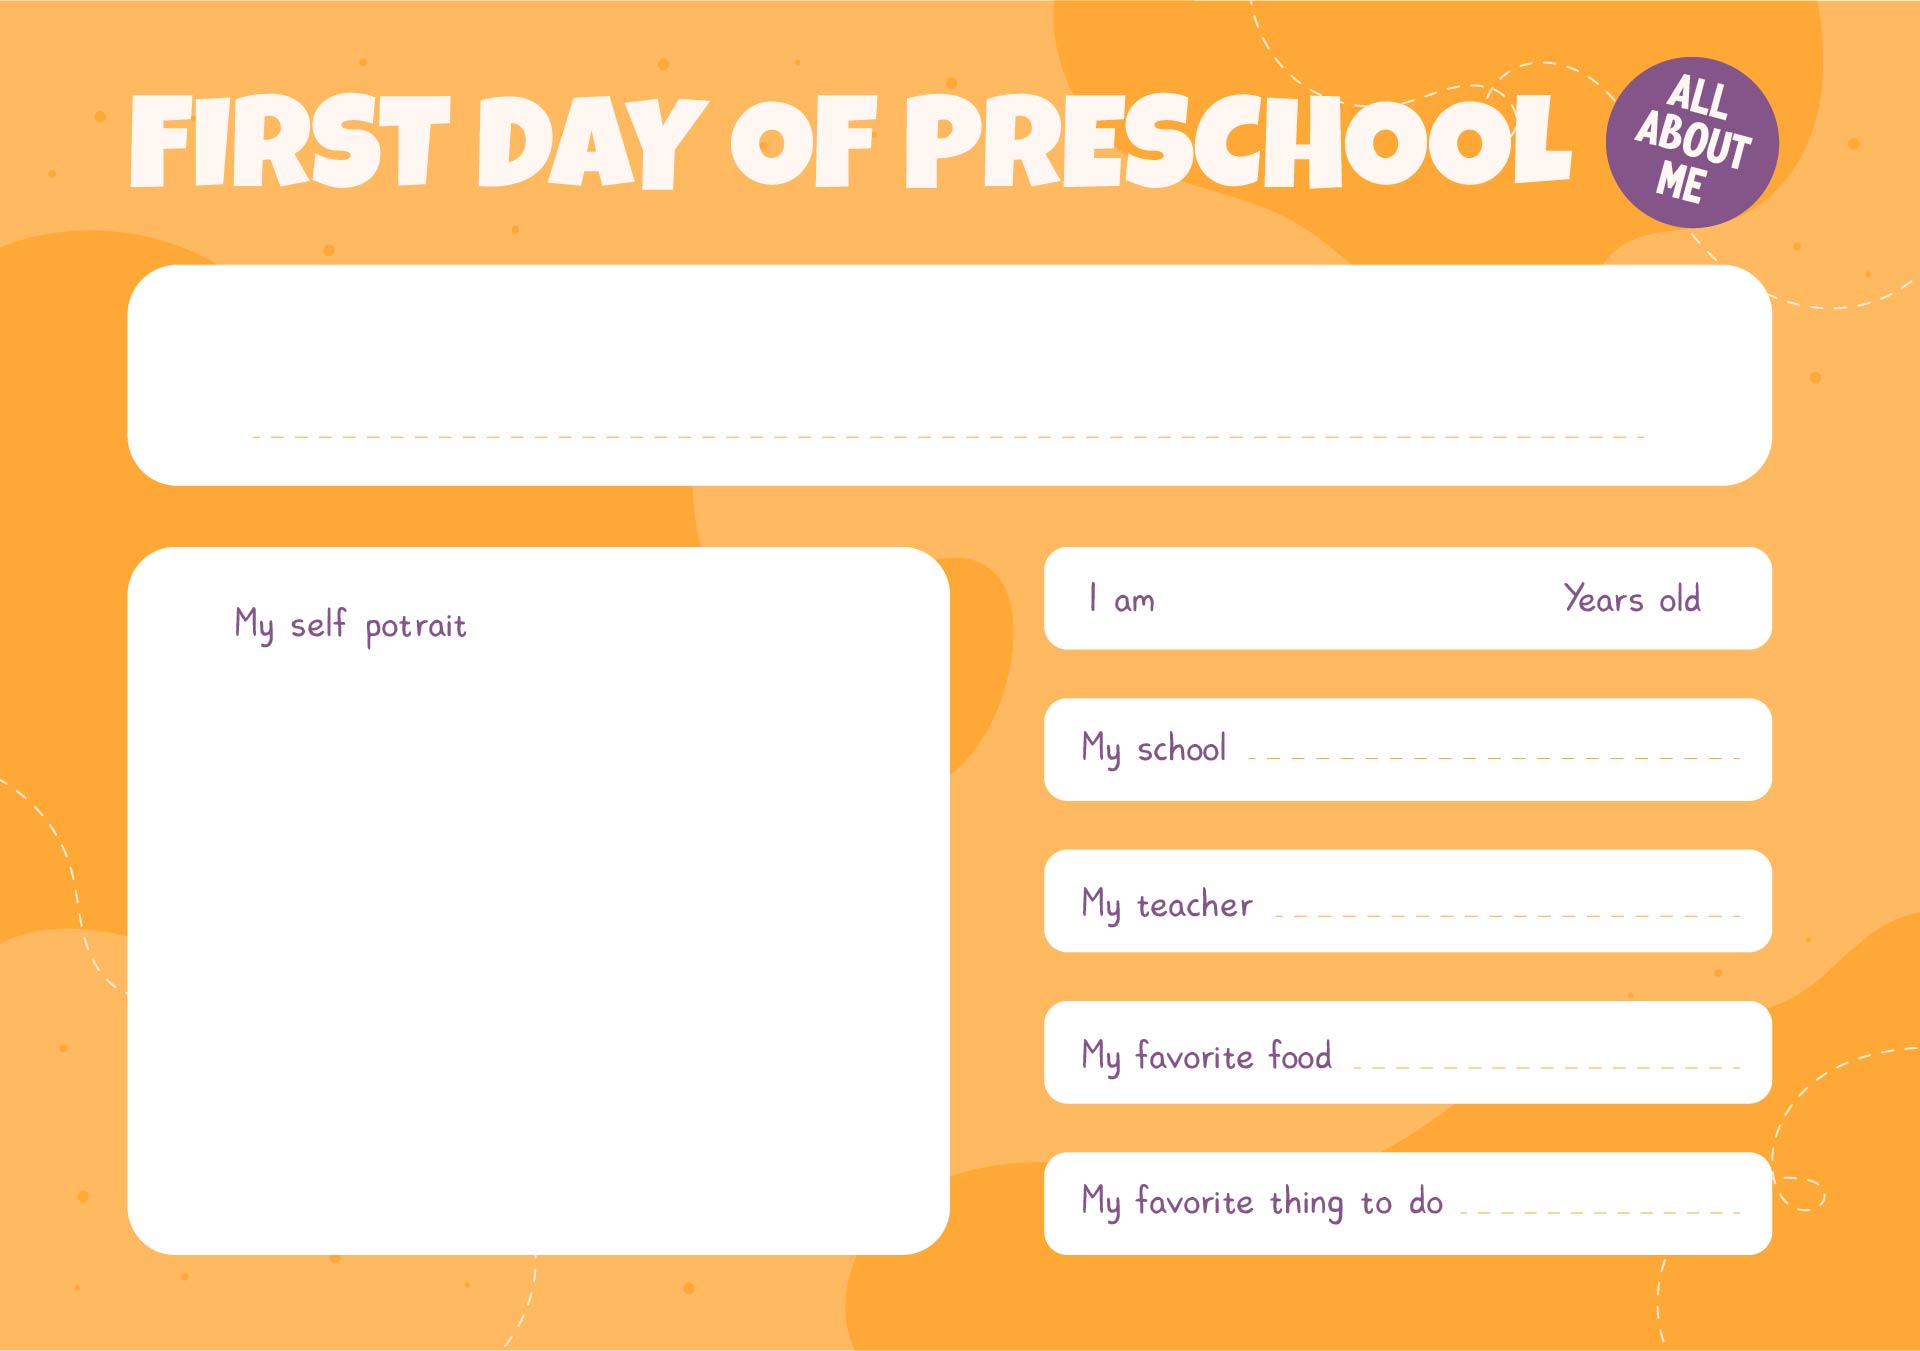 9-best-images-of-first-day-of-preschool-printable-first-day-of